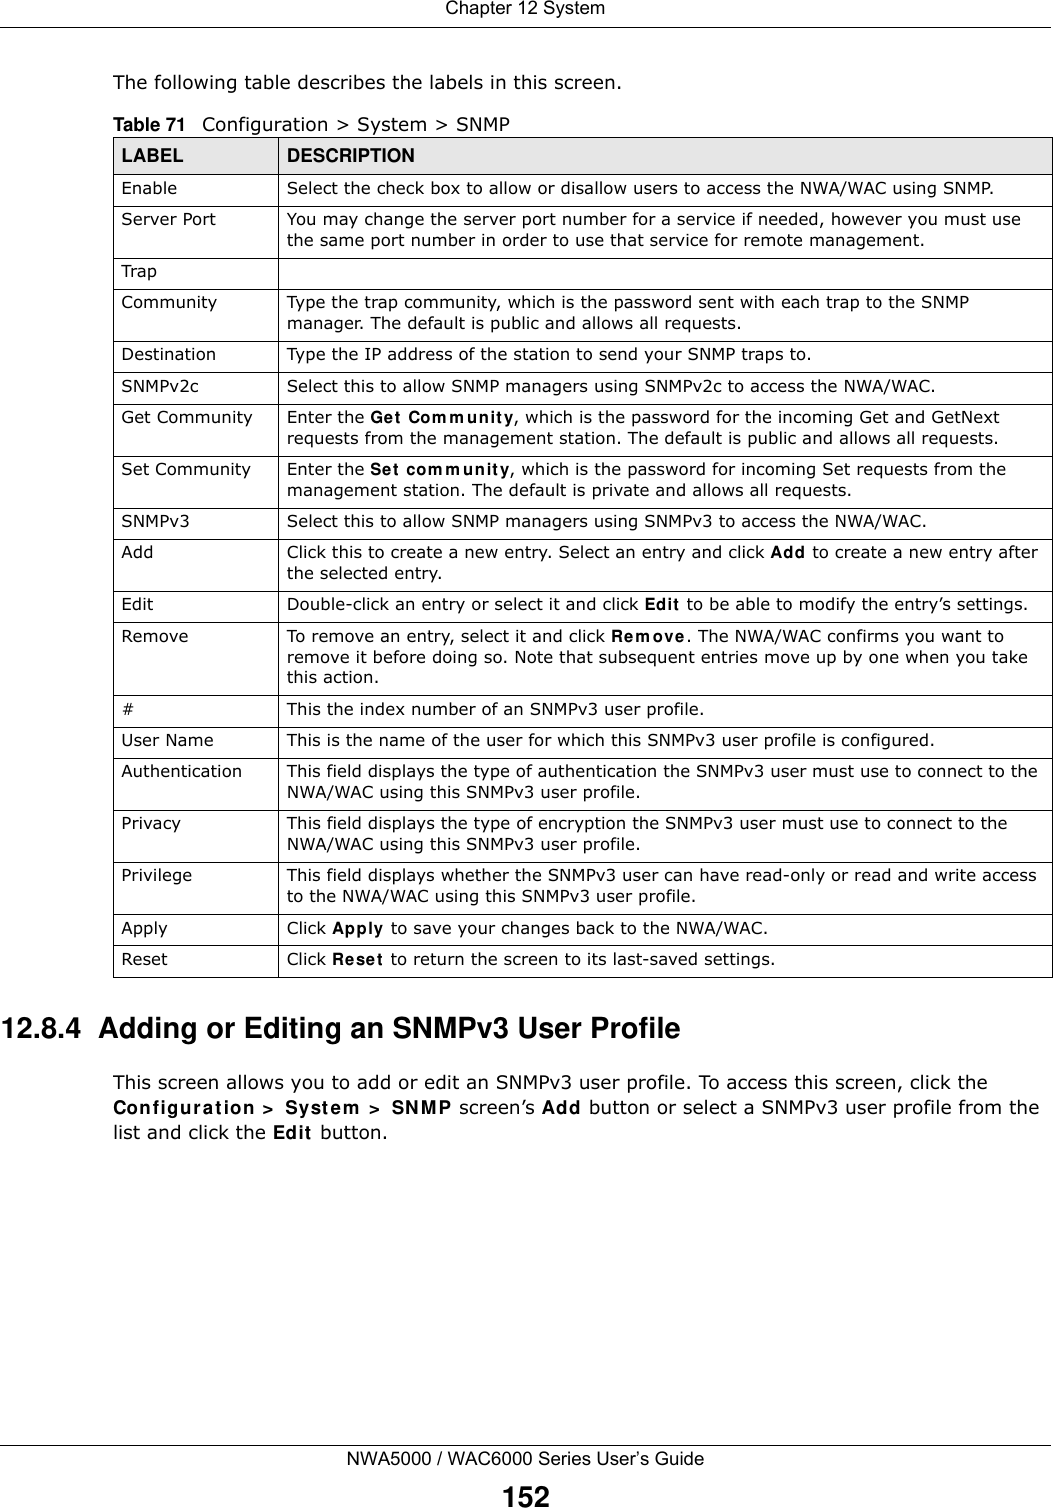 Chapter 12 SystemNWA5000 / WAC6000 Series User’s Guide152The following table describes the labels in this screen.  12.8.4  Adding or Editing an SNMPv3 User ProfileThis screen allows you to add or edit an SNMPv3 user profile. To access this screen, click the Configuration &gt; System &gt; SNMP screen’s Add button or select a SNMPv3 user profile from the list and click the Edit button.Table 71   Configuration &gt; System &gt; SNMPLABEL DESCRIPTIONEnable Select the check box to allow or disallow users to access the NWA/WAC using SNMP.Server Port You may change the server port number for a service if needed, however you must use the same port number in order to use that service for remote management.TrapCommunity Type the trap community, which is the password sent with each trap to the SNMP manager. The default is public and allows all requests.Destination Type the IP address of the station to send your SNMP traps to.SNMPv2c Select this to allow SNMP managers using SNMPv2c to access the NWA/WAC.Get Community Enter the Get Community, which is the password for the incoming Get and GetNext requests from the management station. The default is public and allows all requests.Set Community Enter the Set community, which is the password for incoming Set requests from the management station. The default is private and allows all requests.SNMPv3 Select this to allow SNMP managers using SNMPv3 to access the NWA/WAC.Add Click this to create a new entry. Select an entry and click Add to create a new entry after the selected entry.Edit Double-click an entry or select it and click Edit to be able to modify the entry’s settings. Remove To remove an entry, select it and click Remove. The NWA/WAC confirms you want to remove it before doing so. Note that subsequent entries move up by one when you take this action.#This the index number of an SNMPv3 user profile.User Name This is the name of the user for which this SNMPv3 user profile is configured.Authentication This field displays the type of authentication the SNMPv3 user must use to connect to the NWA/WAC using this SNMPv3 user profile.Privacy This field displays the type of encryption the SNMPv3 user must use to connect to the NWA/WAC using this SNMPv3 user profile.Privilege This field displays whether the SNMPv3 user can have read-only or read and write access to the NWA/WAC using this SNMPv3 user profile.Apply Click Apply to save your changes back to the NWA/WAC. Reset Click Reset to return the screen to its last-saved settings. 